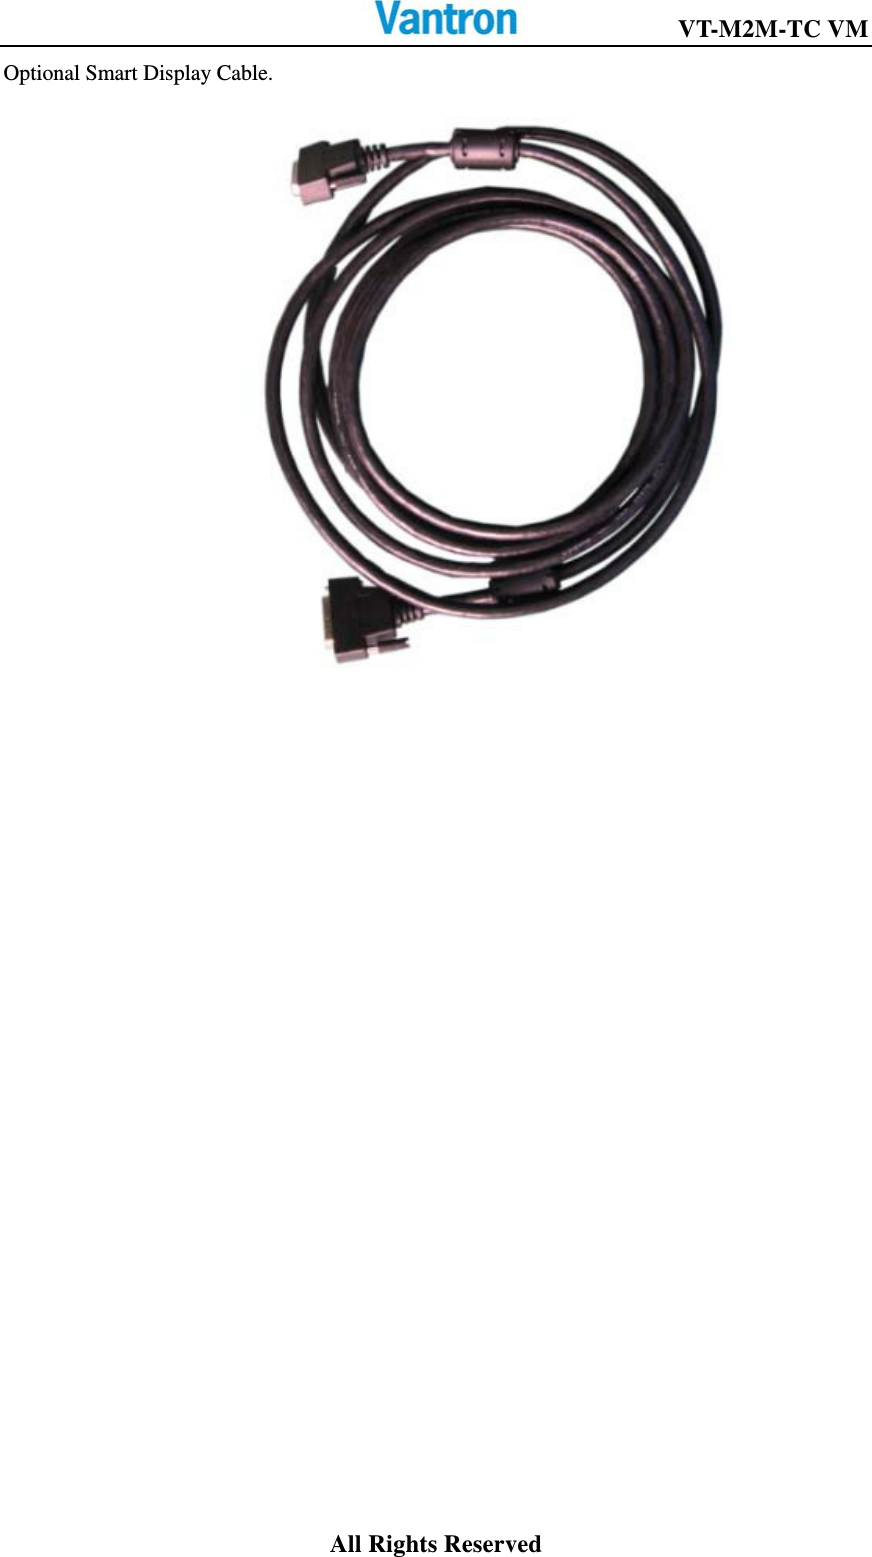                                                     VT-M2M-TC VM     All Rights Reserved Optional Smart Display Cable.         